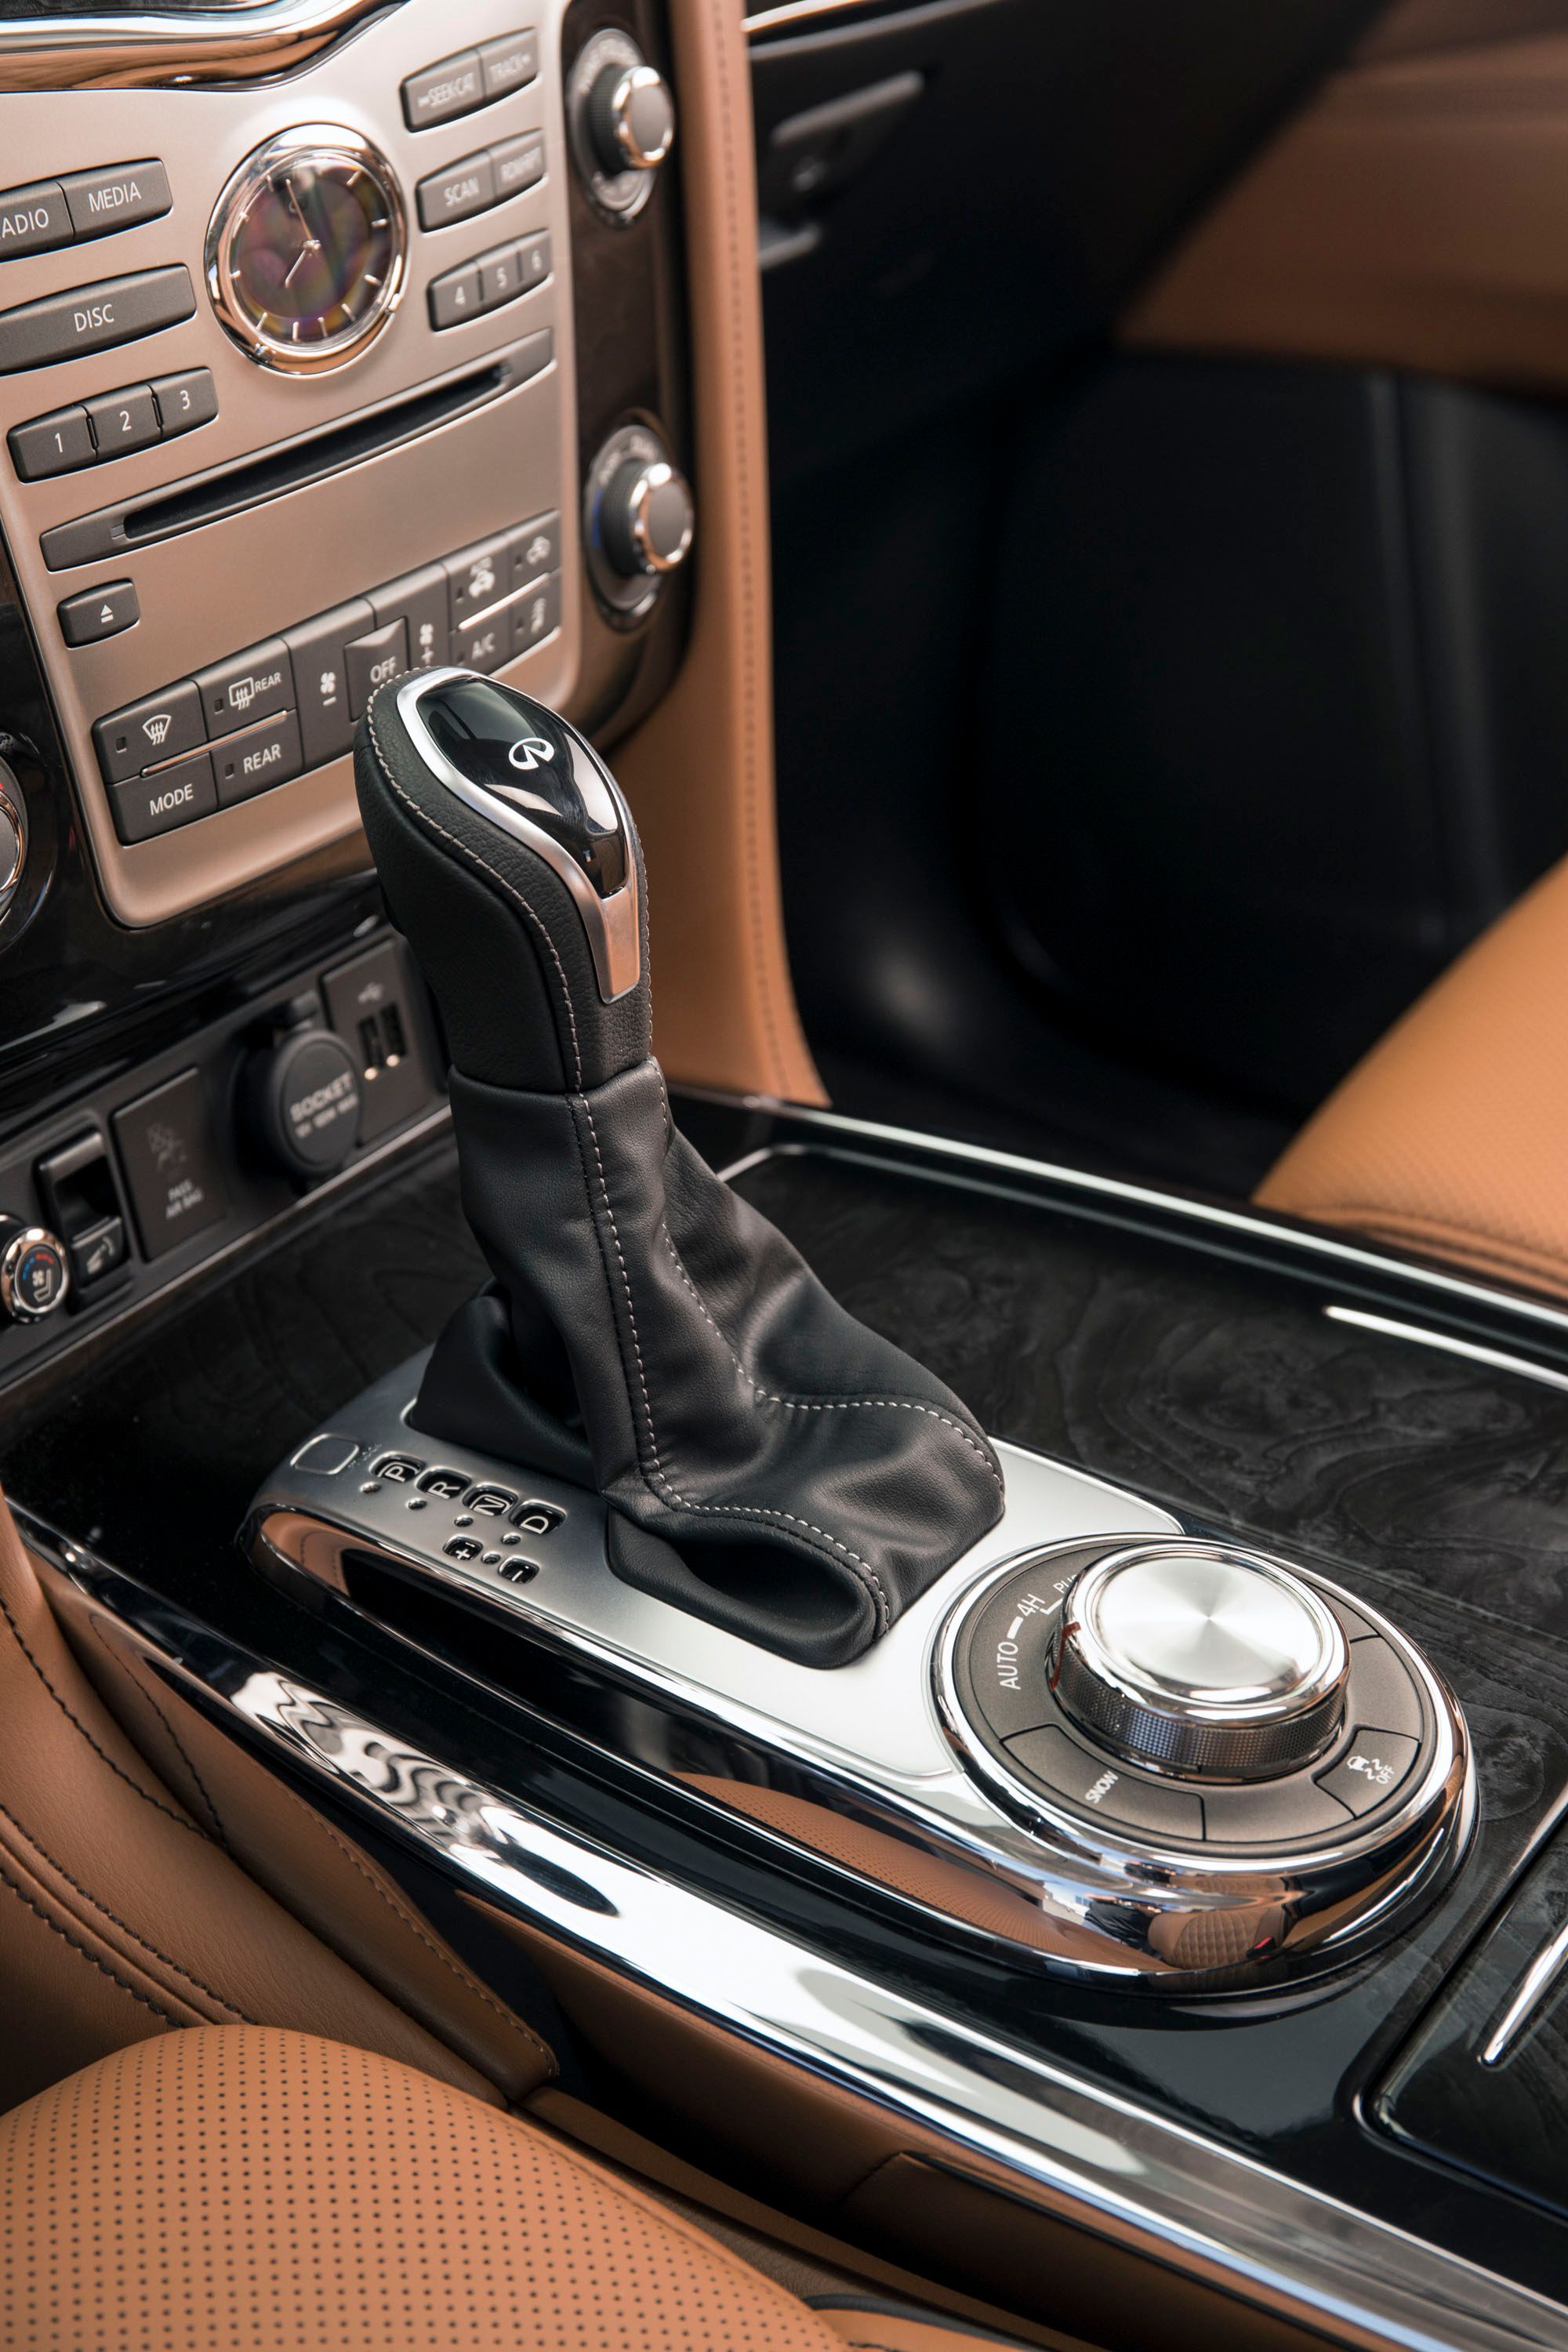 Seven-speed automatic transmission